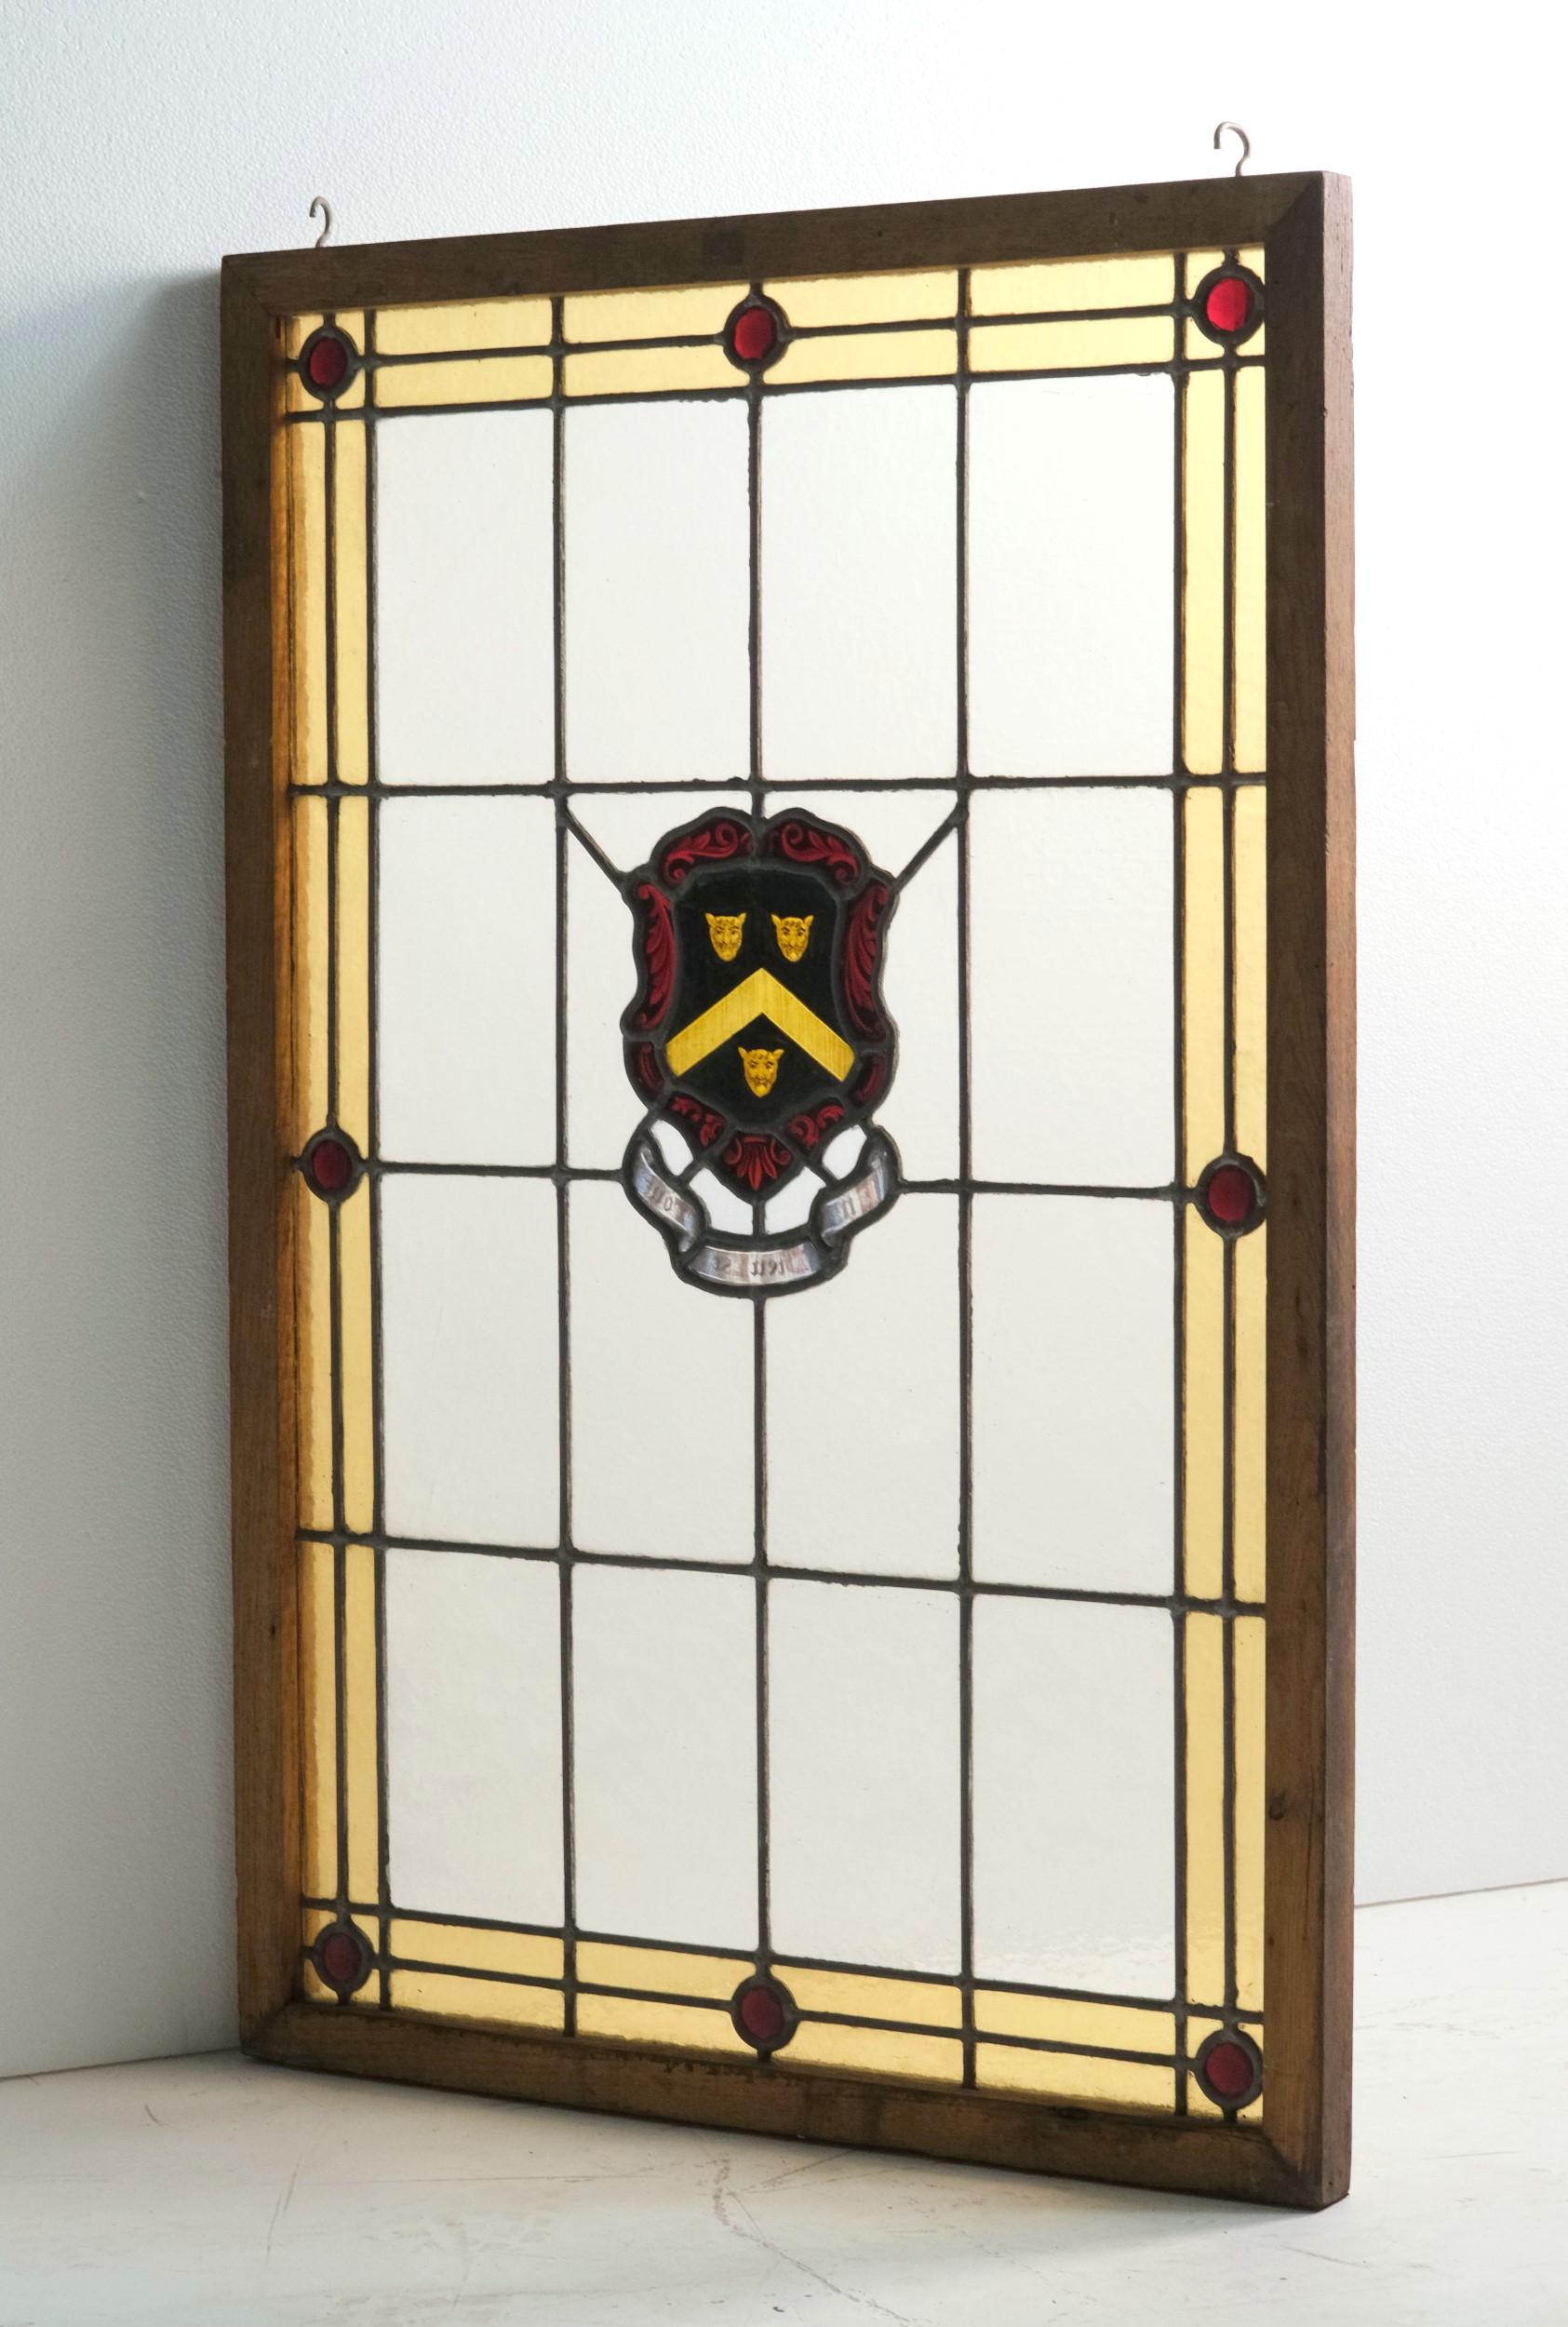 20th Century Center Lion Head Crest Stained Glass Window with Red Jewels and Yellow Border